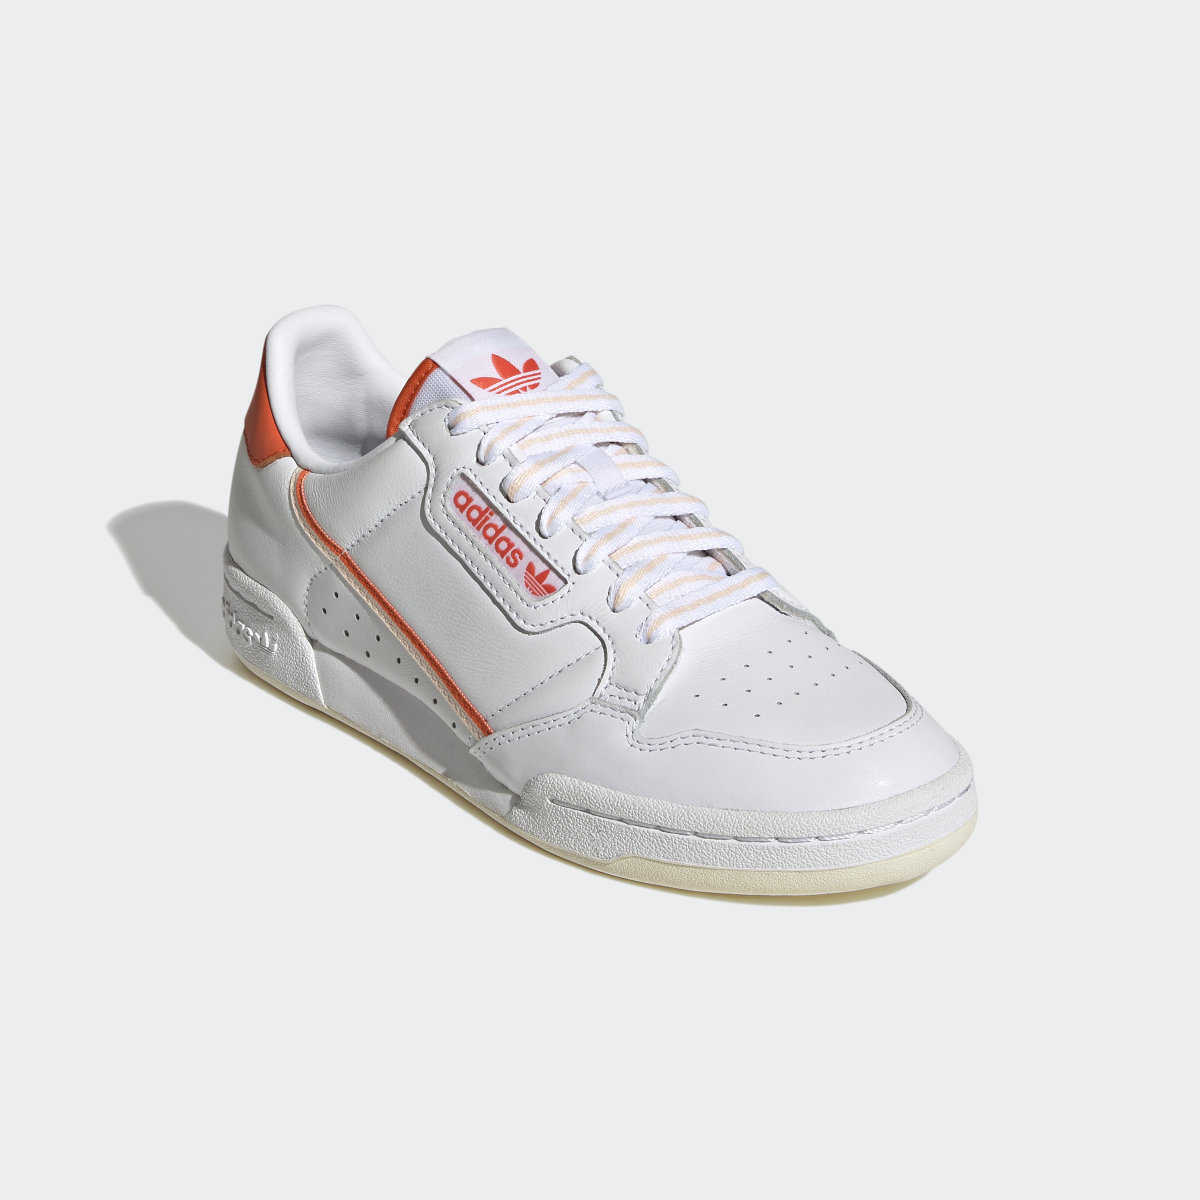 Adidas Continental 80 Shoes. 5